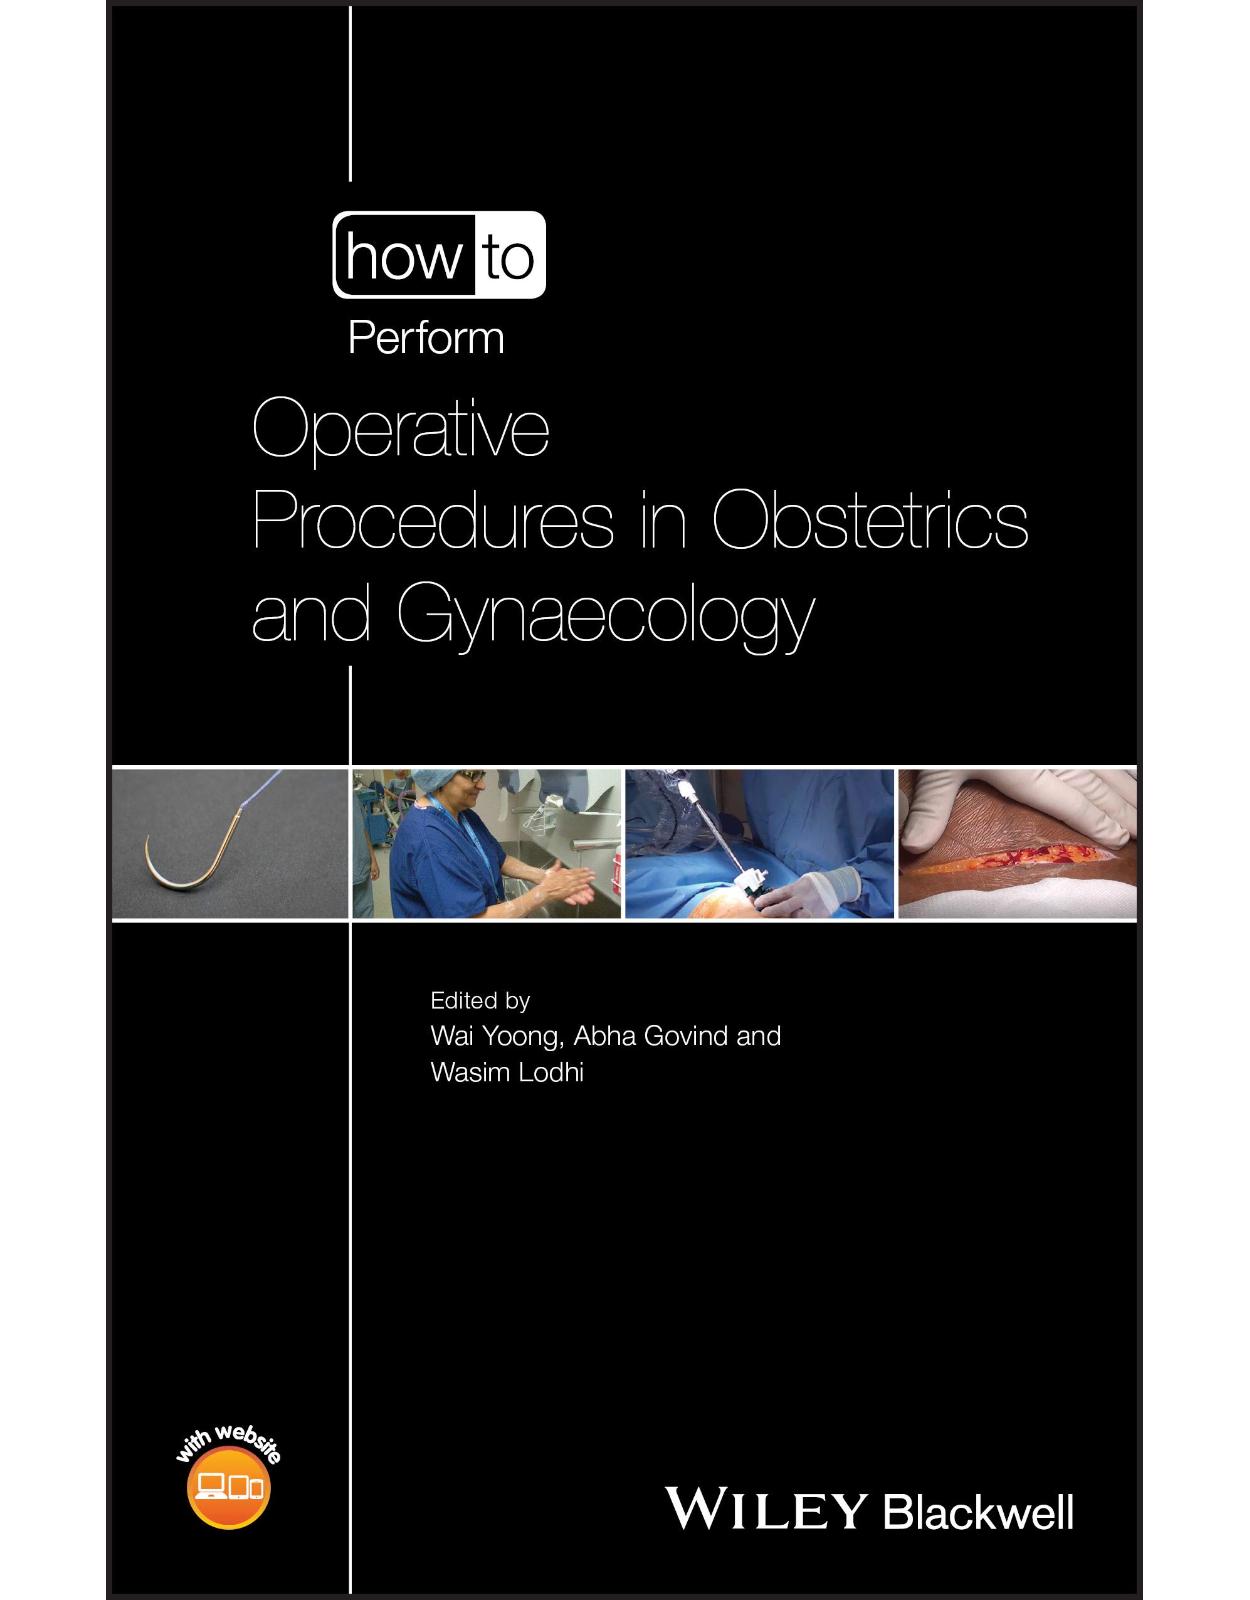 How to Perform Operative Procedures in Obstetrics and Gynaecology